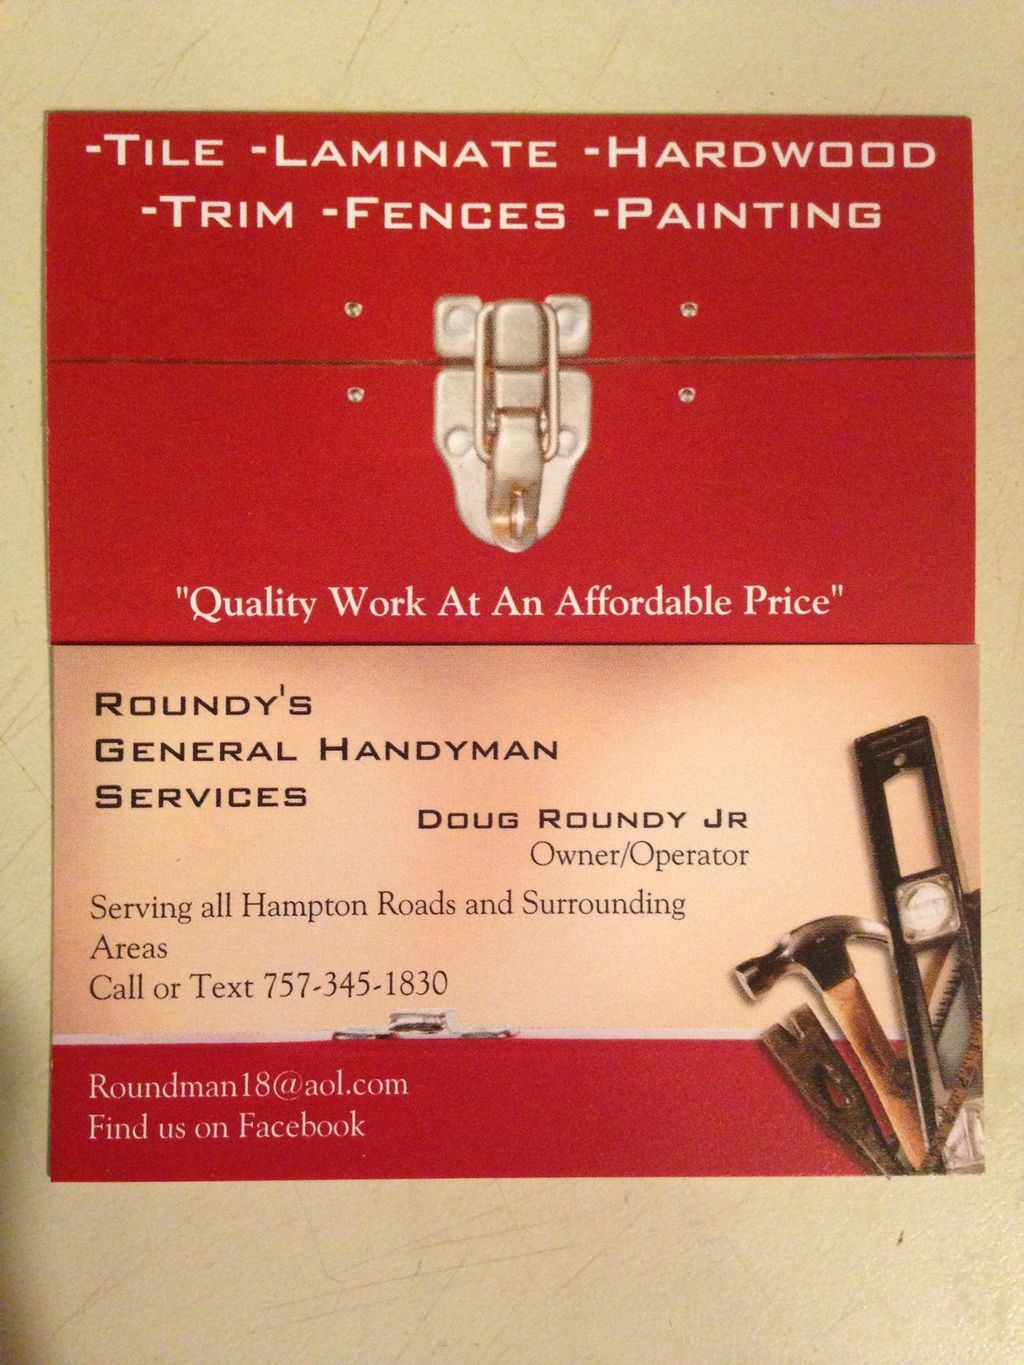 Roundy's General Handyman Services